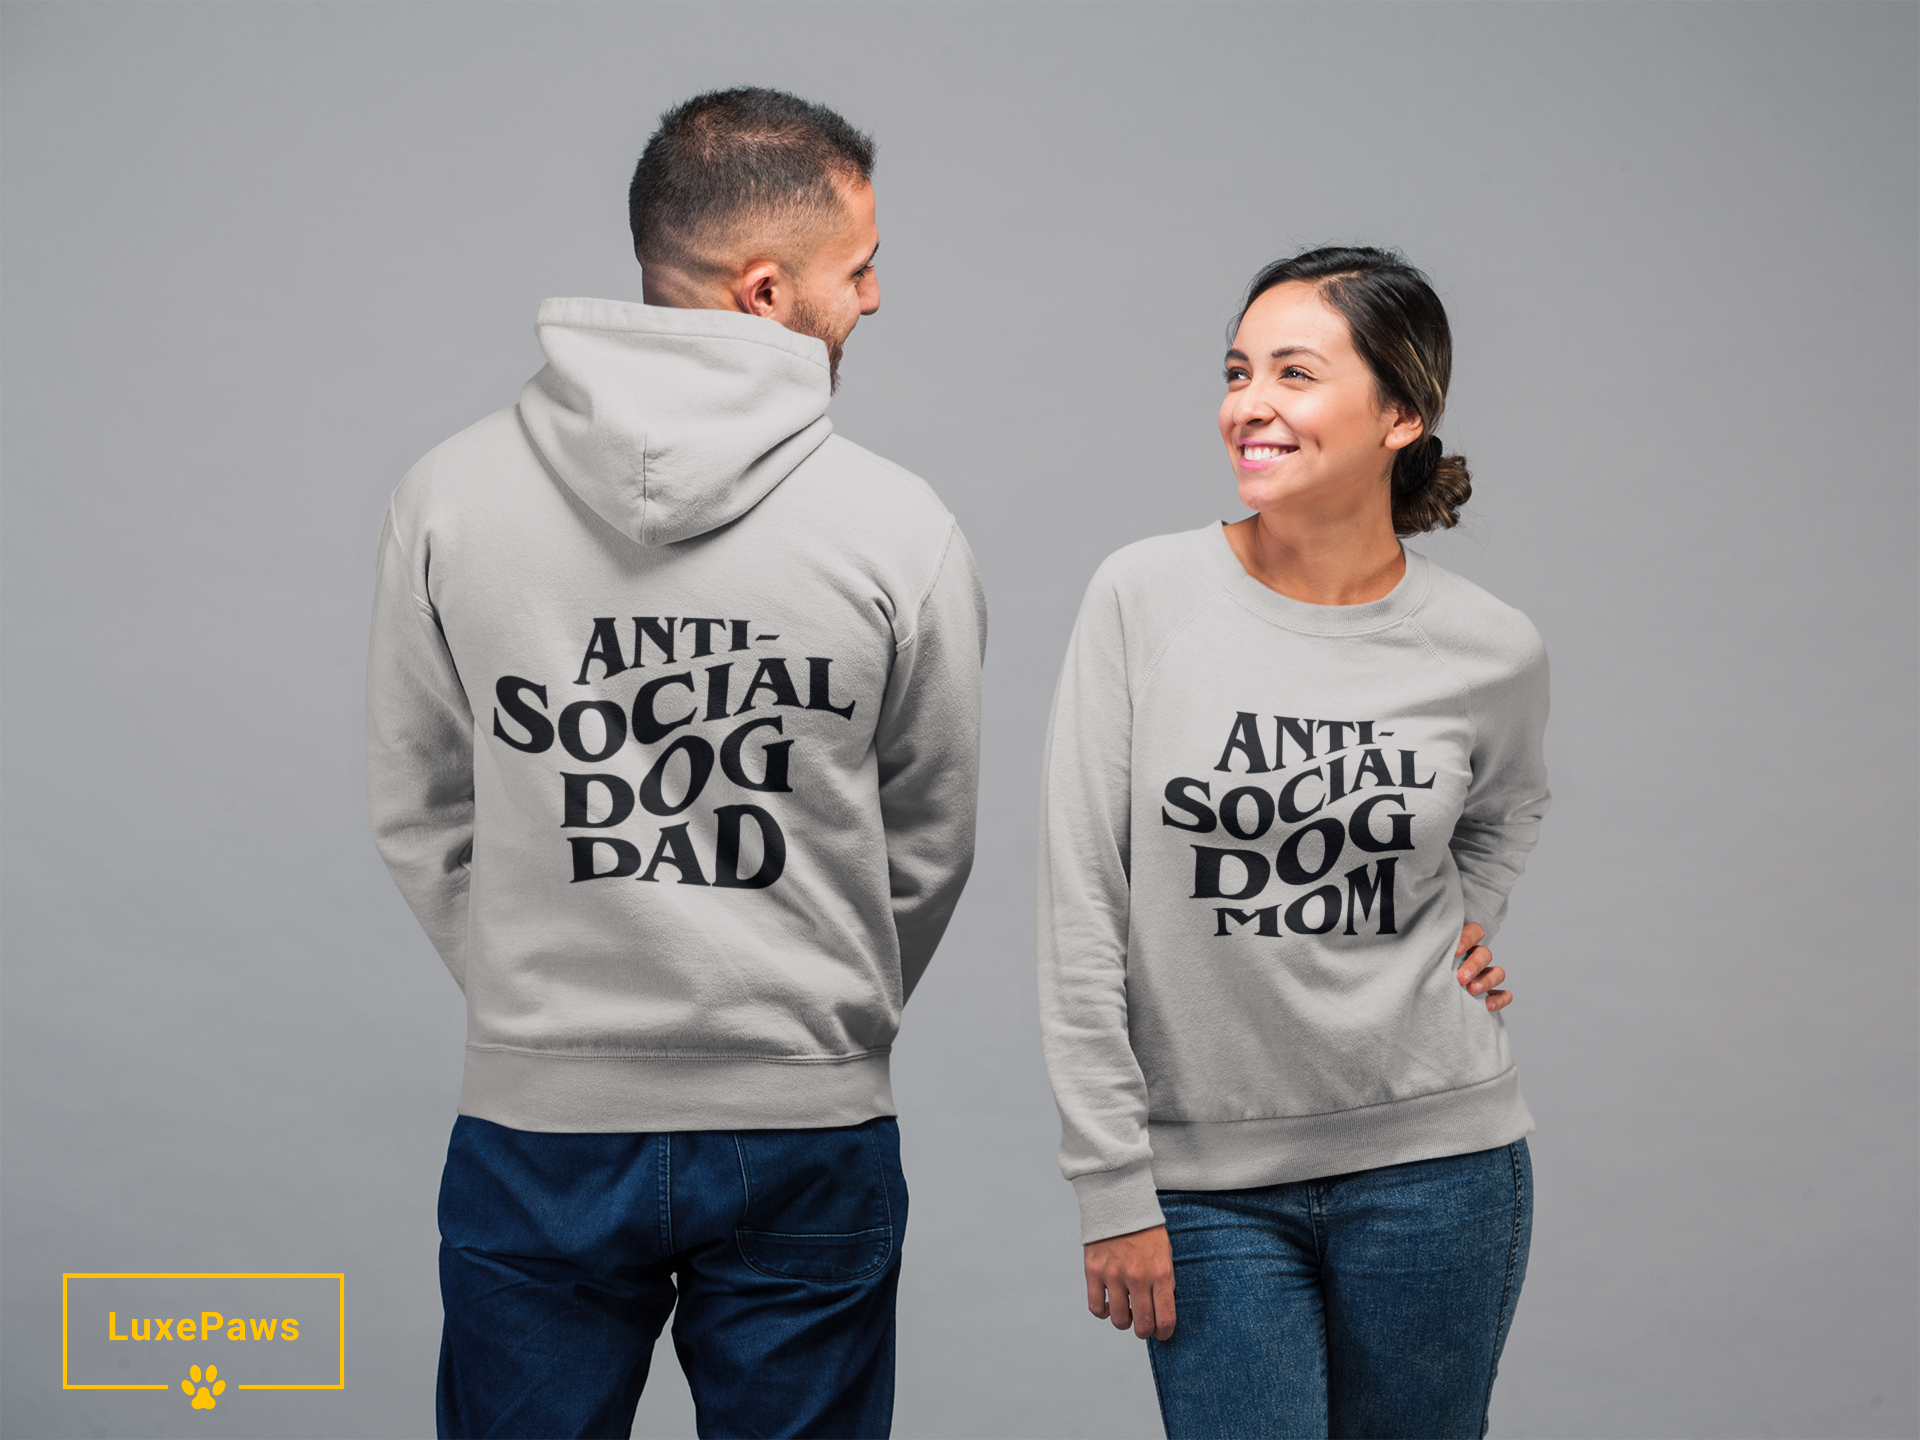 Introvert Paws: The Anti-Social Dog Dad & Mom Collection